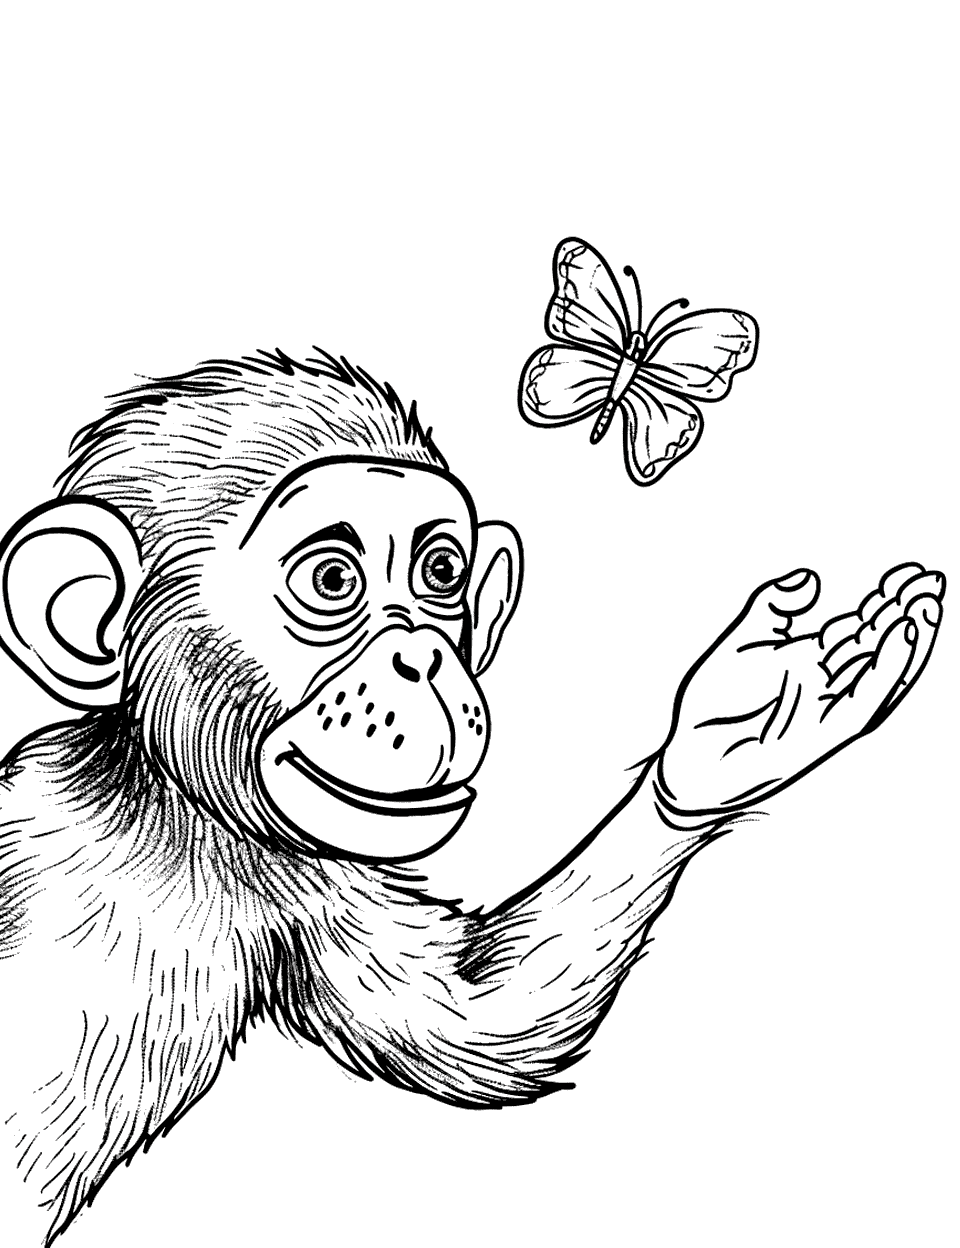 Monkey and a Butterfly Coloring Page - A monkey gently reaches out to a butterfly landing on its hand.